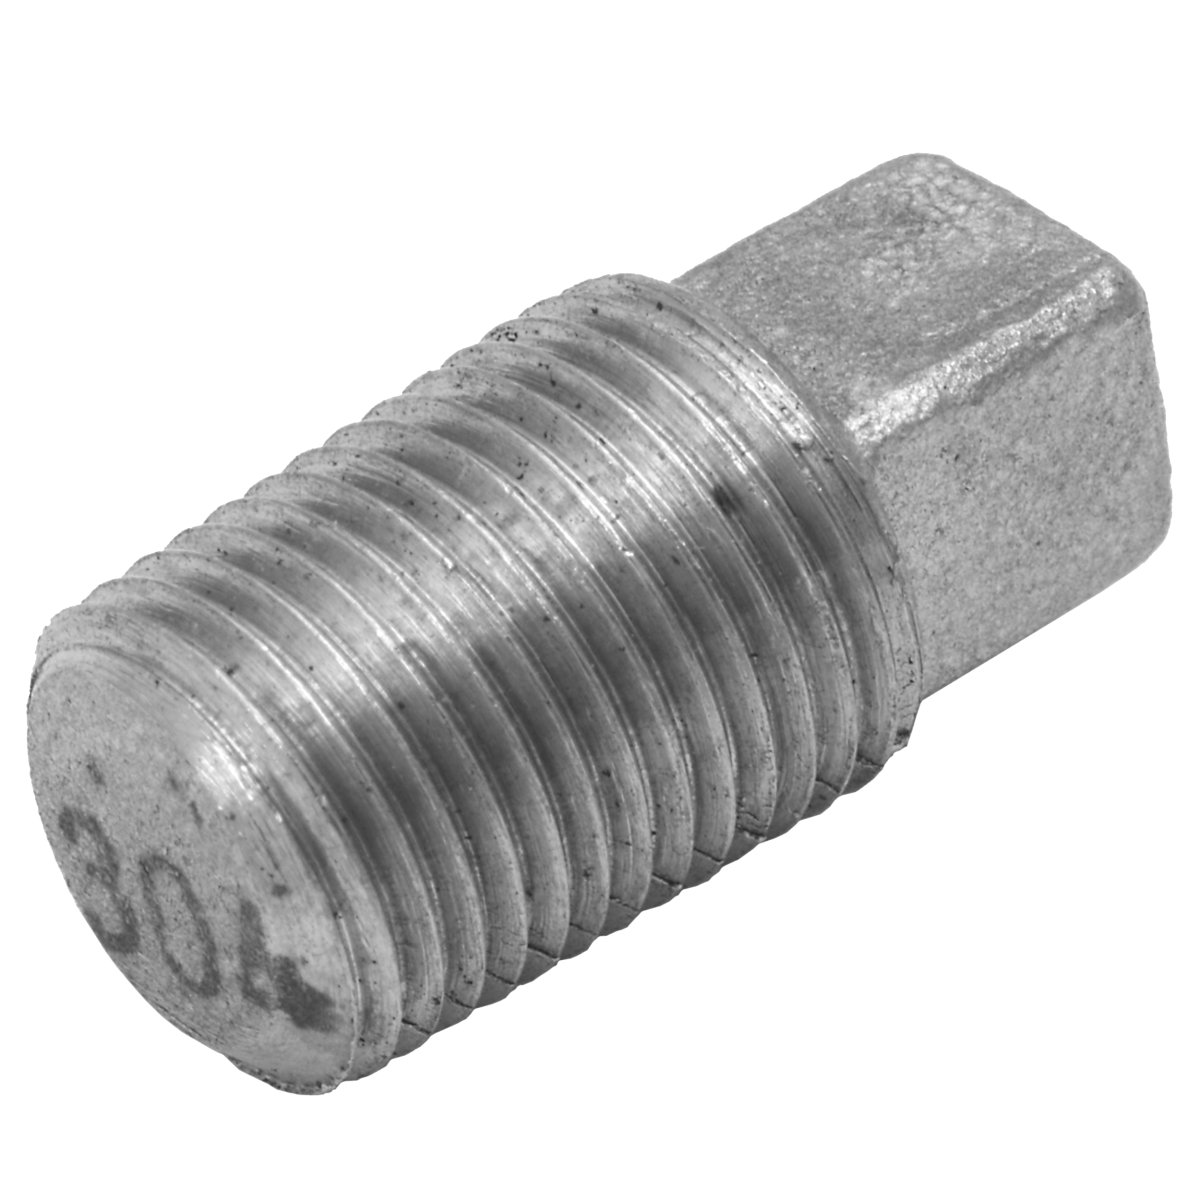 304 Stainless Steel Pipe Fitting 1/4" Square Head Plug